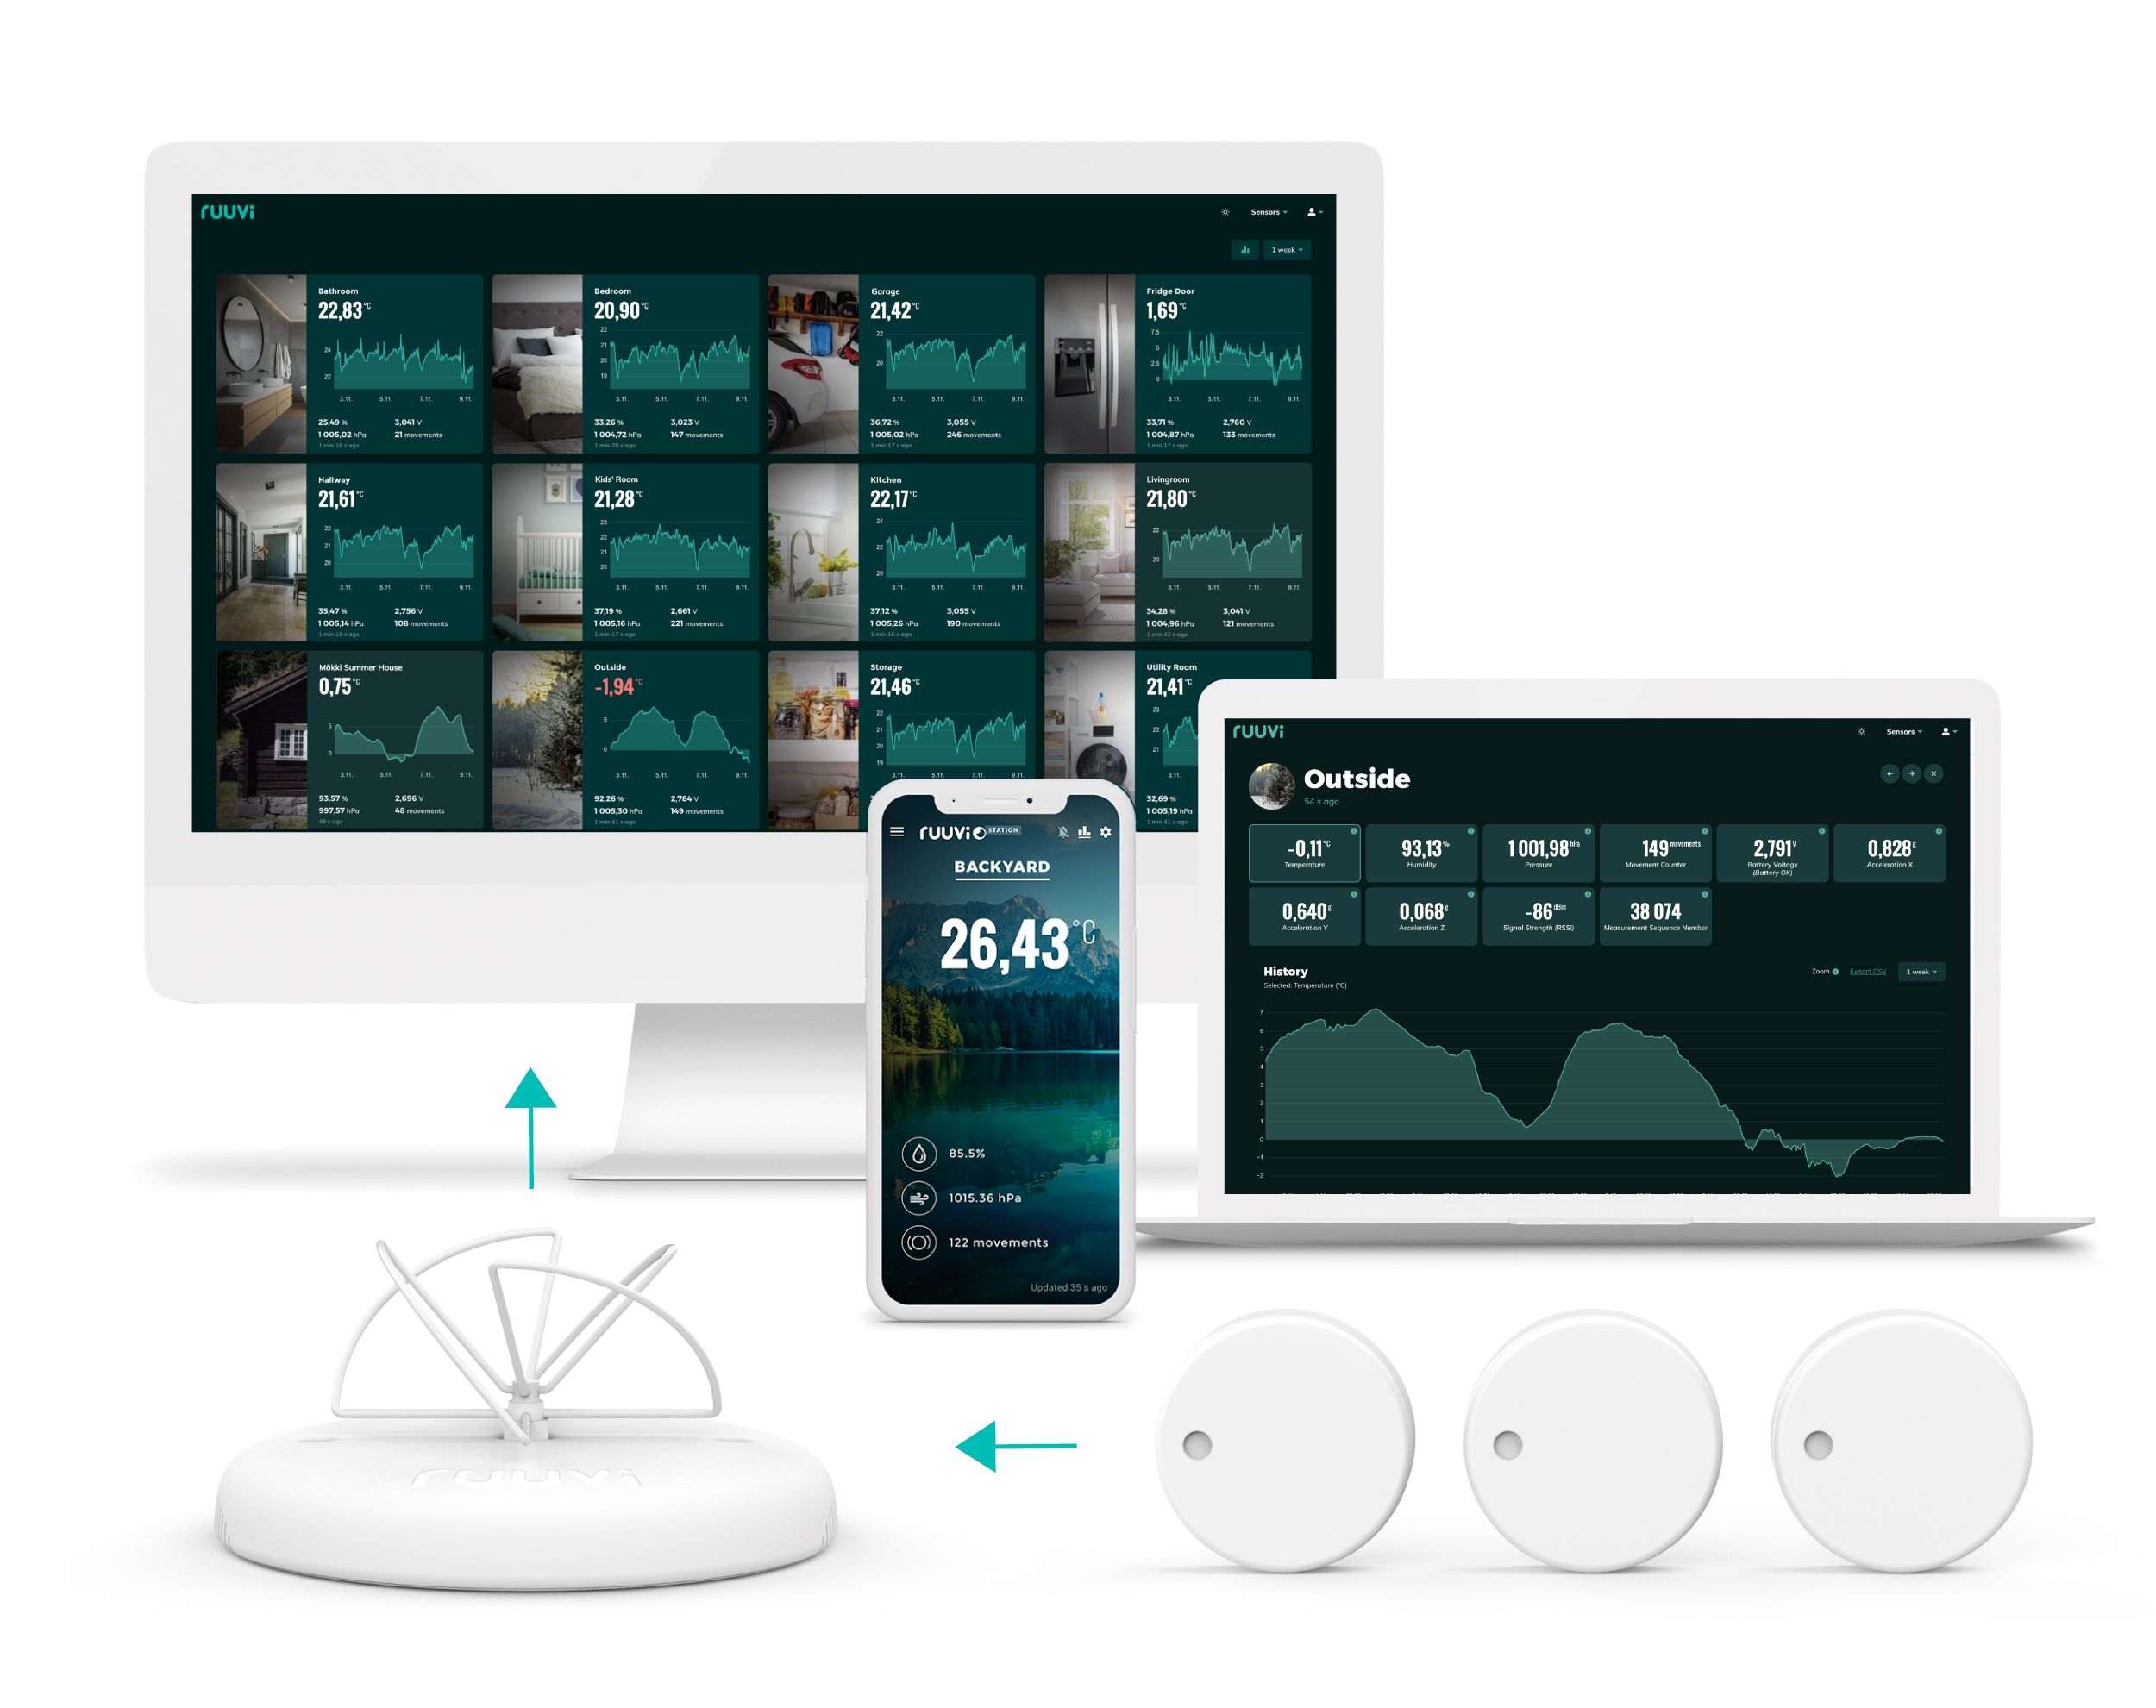 Ruuvi Web Dashboard shown on different devices